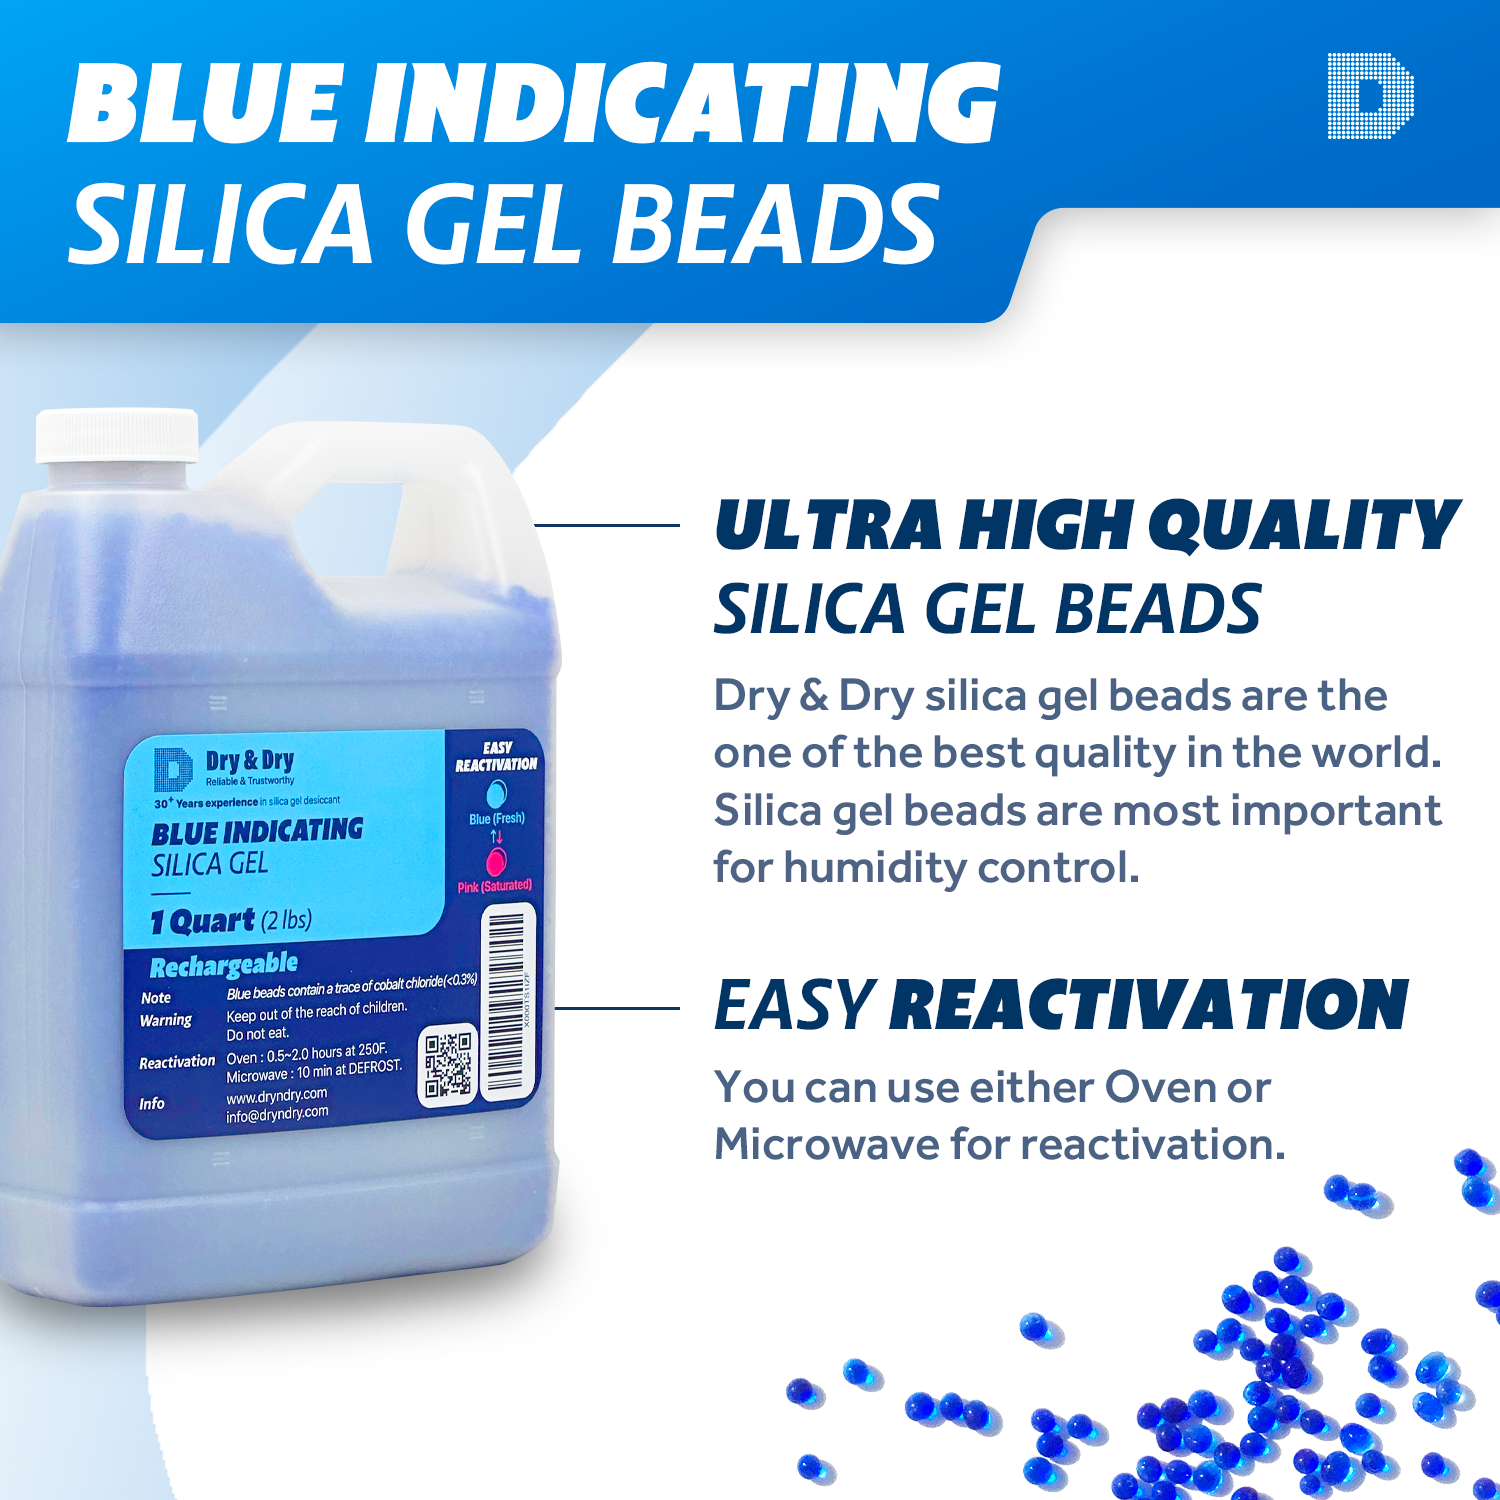 1 Quart Jug Replacement Desiccant Blue Indicating Silica Gel Bead(2 LBS) - Rechargeable